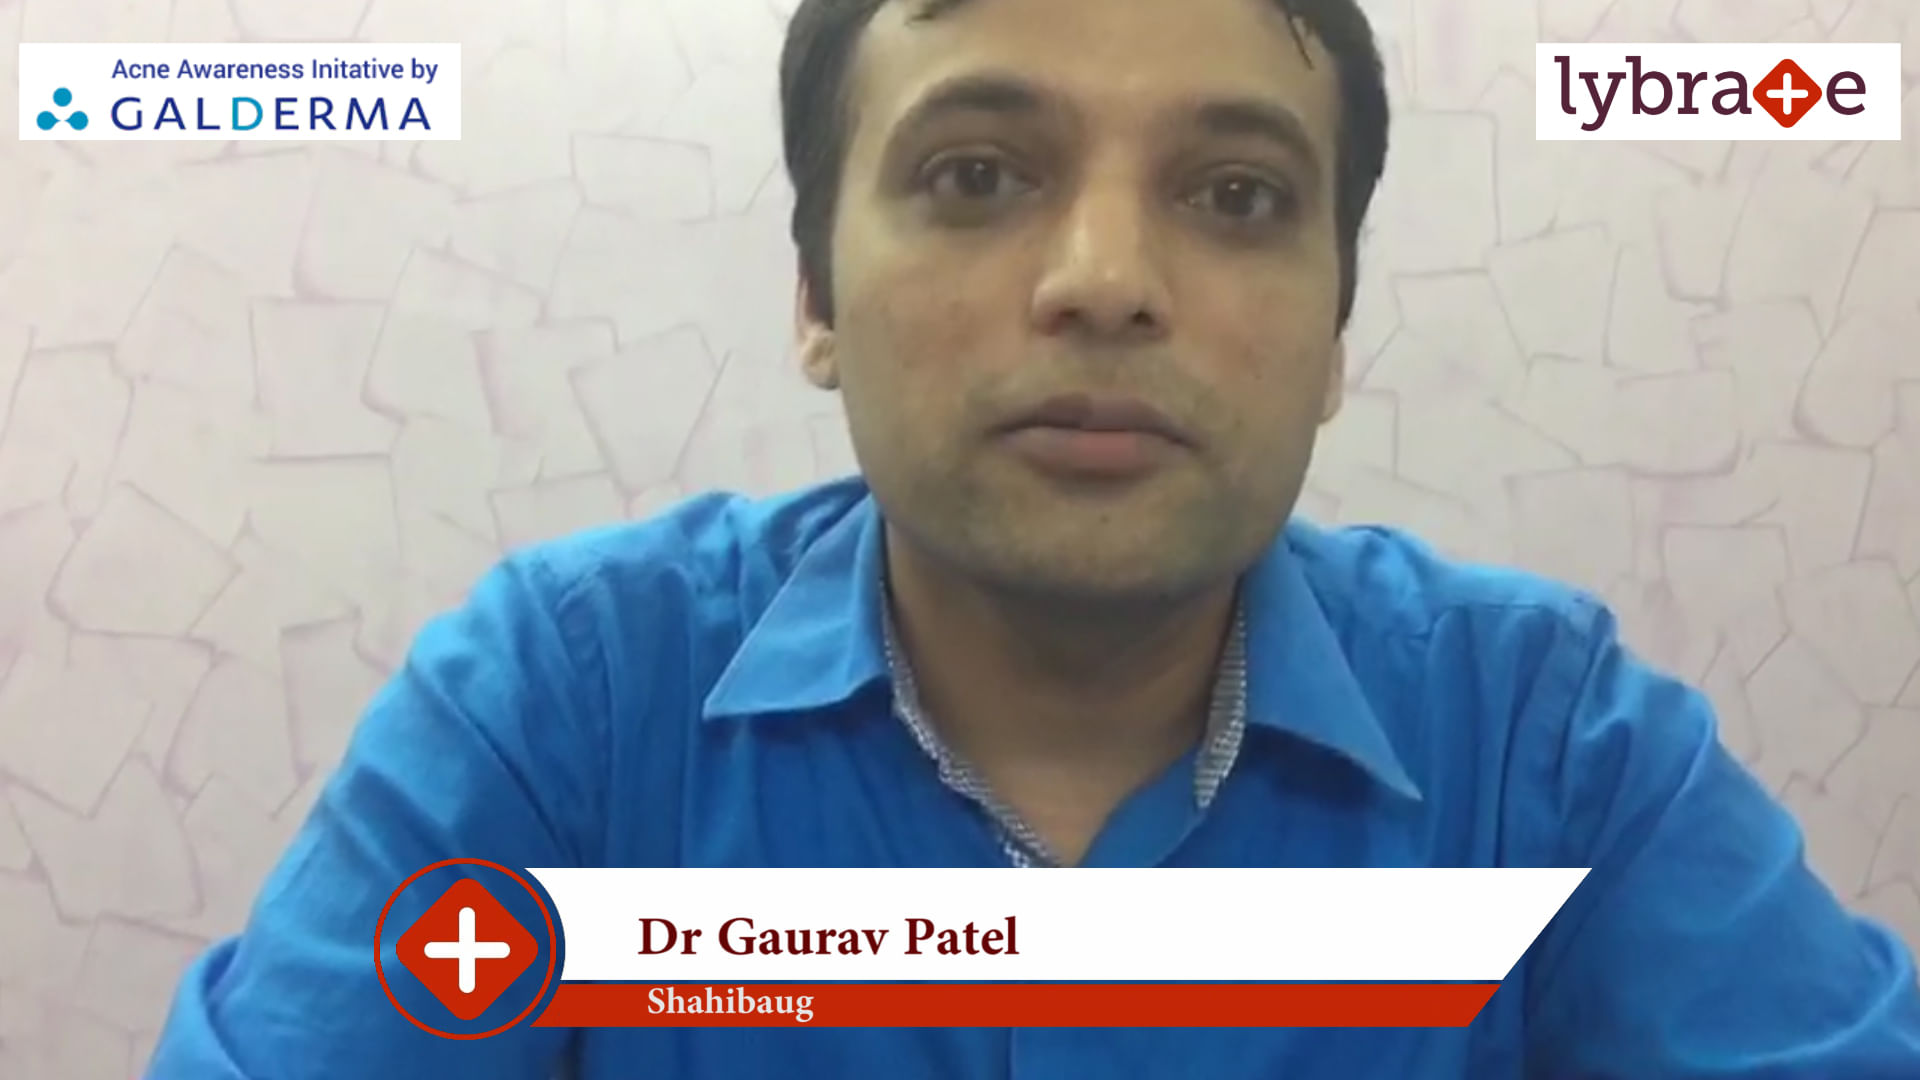 Lybrate | Dr. Gaurav Patel speaks on IMPORTANCE OF TREATING ACNE EARLY